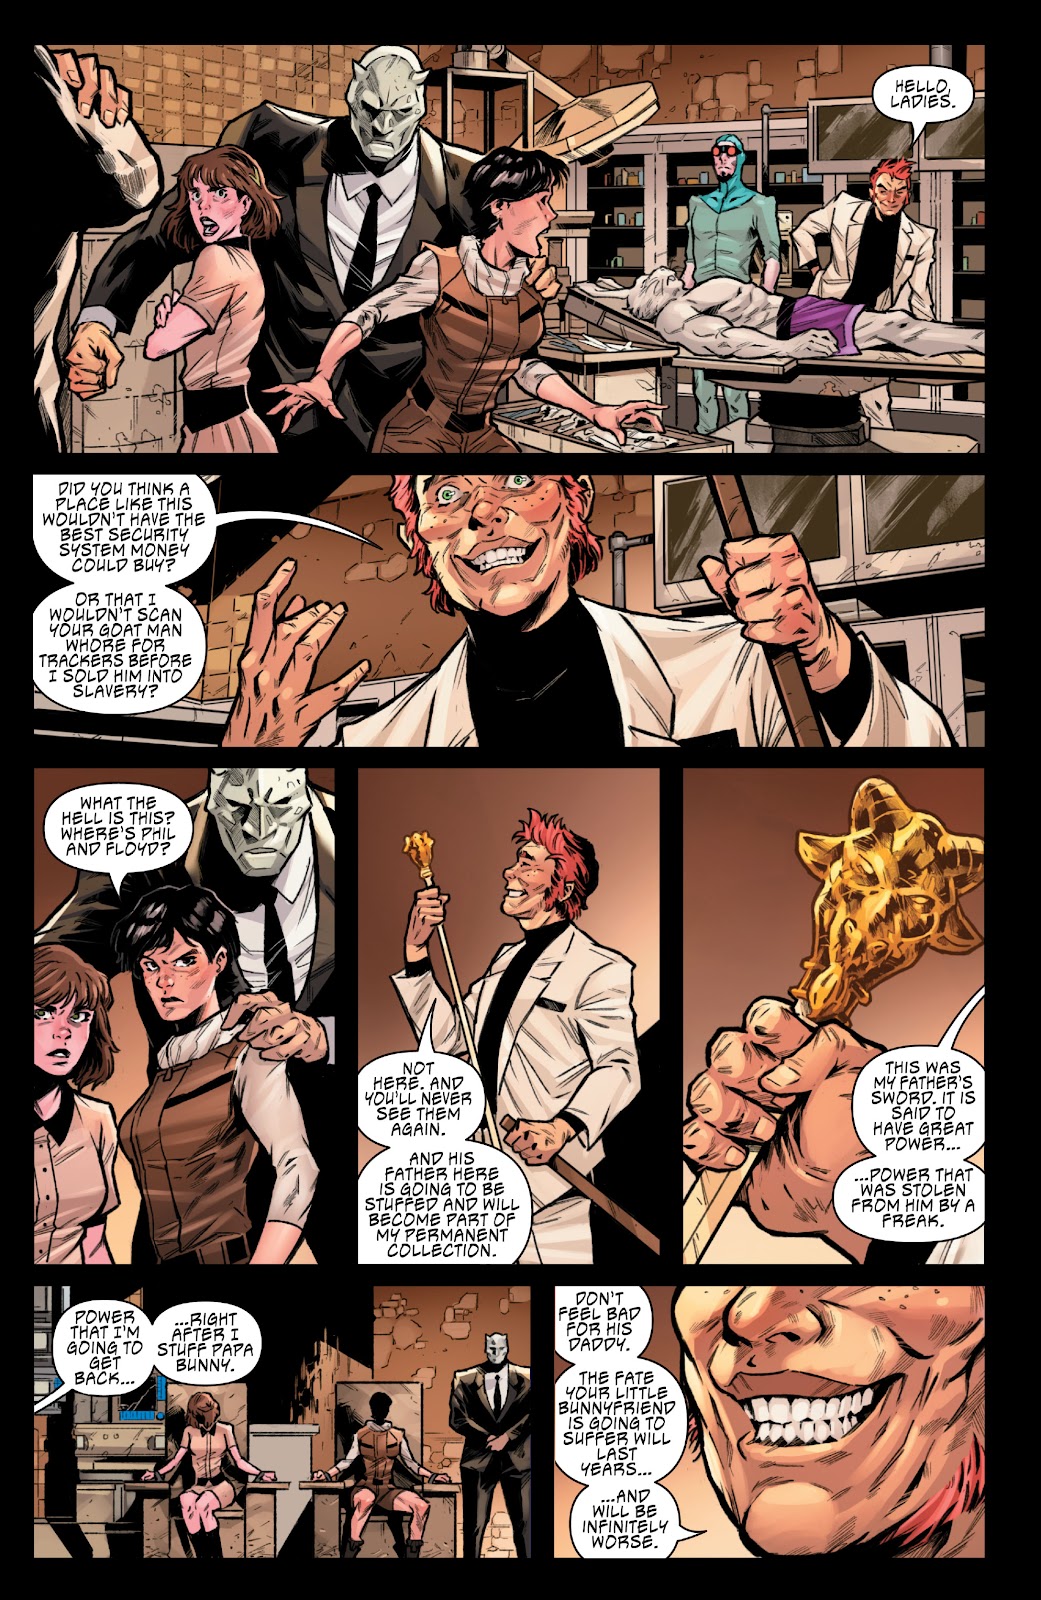 Man Goat & The Bunny Man issue 2023 Spring Special - Page 28